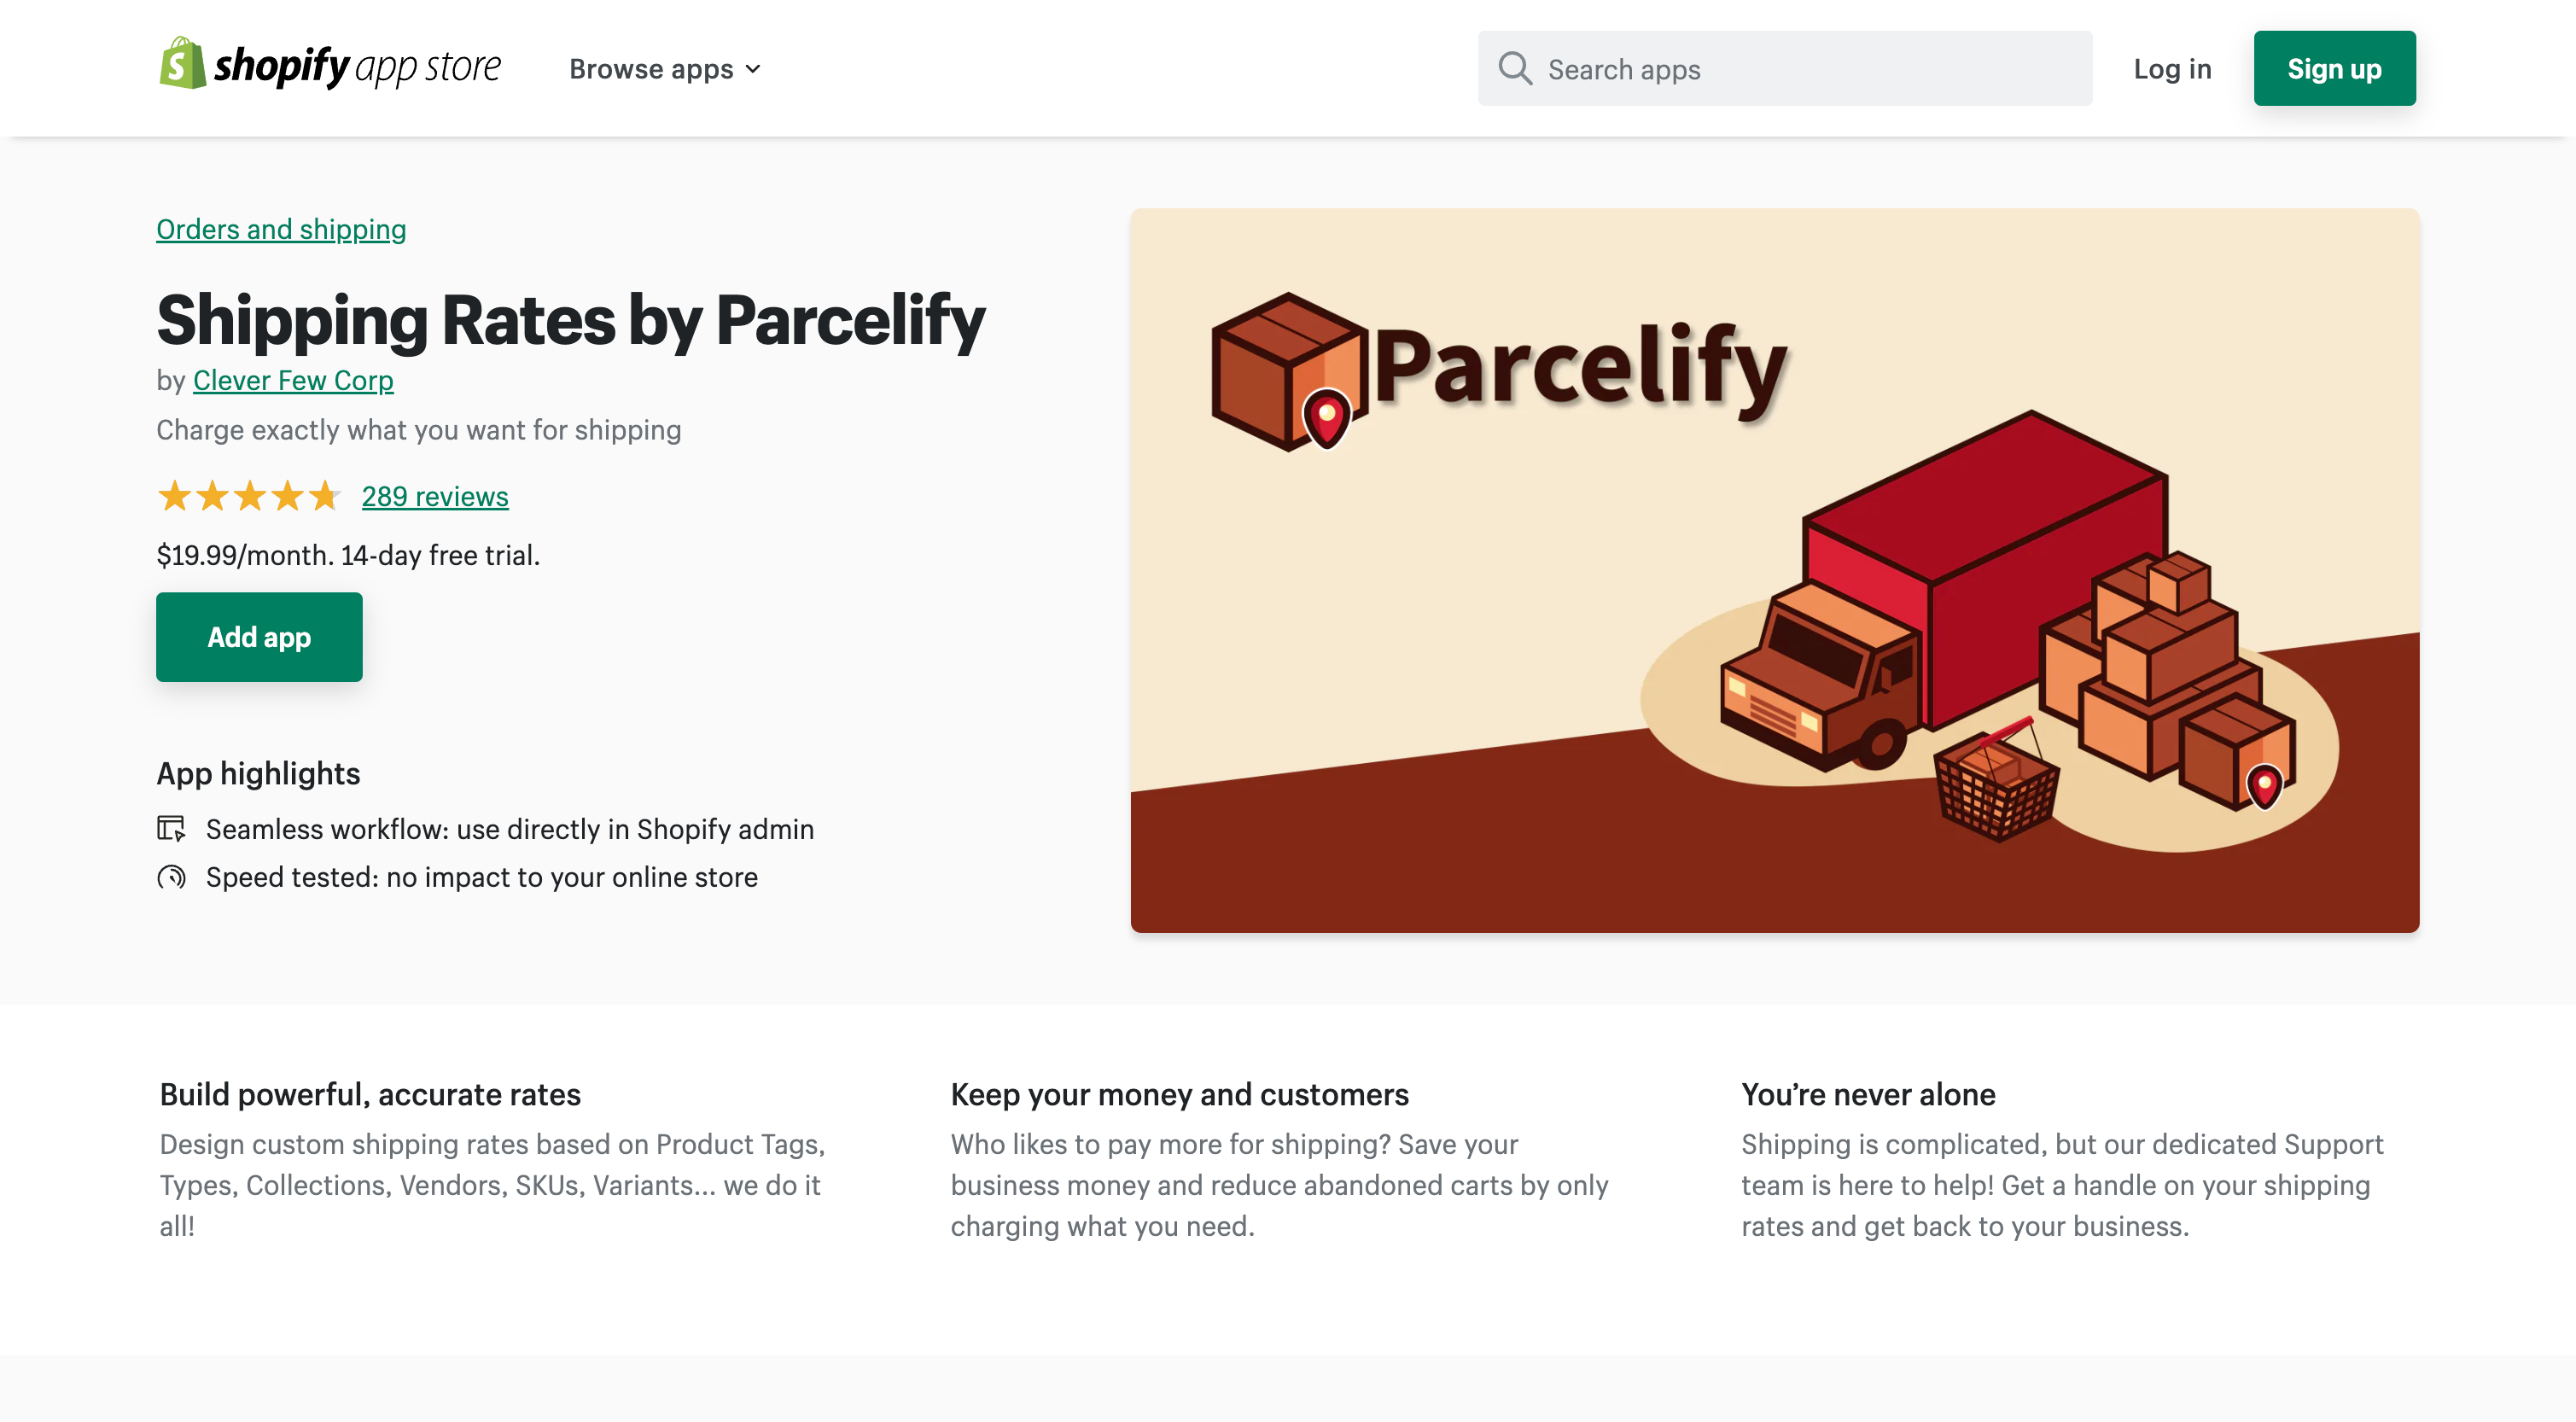 Shipping Rates by Parcelify - Charge exactly what you want for shipping